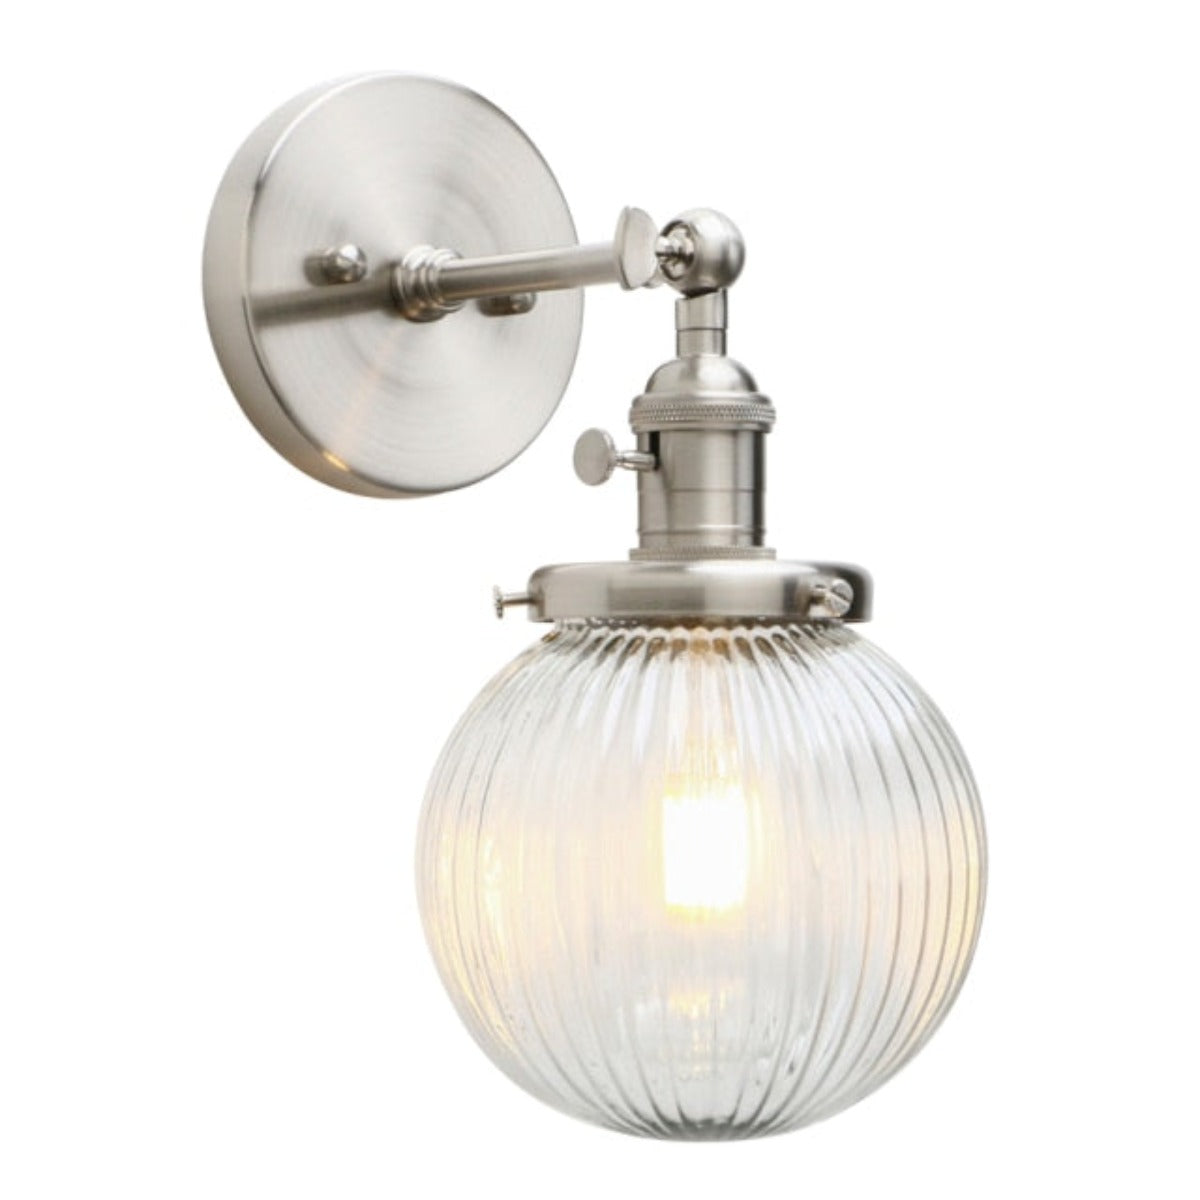 Side view of vintage style famrhouse Wall Sconce, ribbed Clear Glass Globe shown in brushed nickel finish.